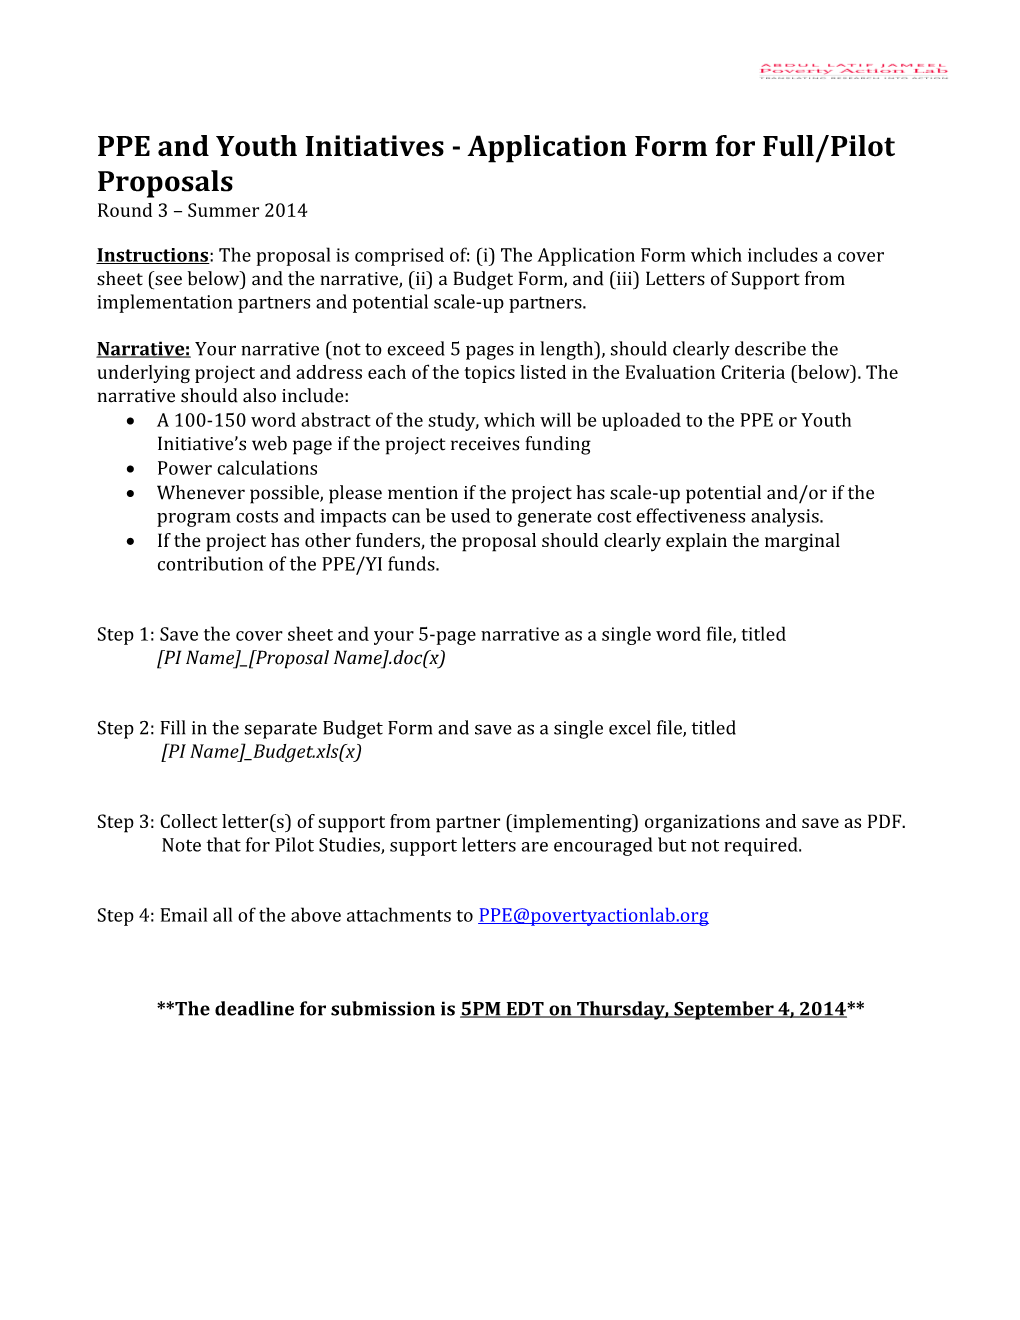 PPE and Youth Initiatives- Application Form for Full/Pilot Proposals